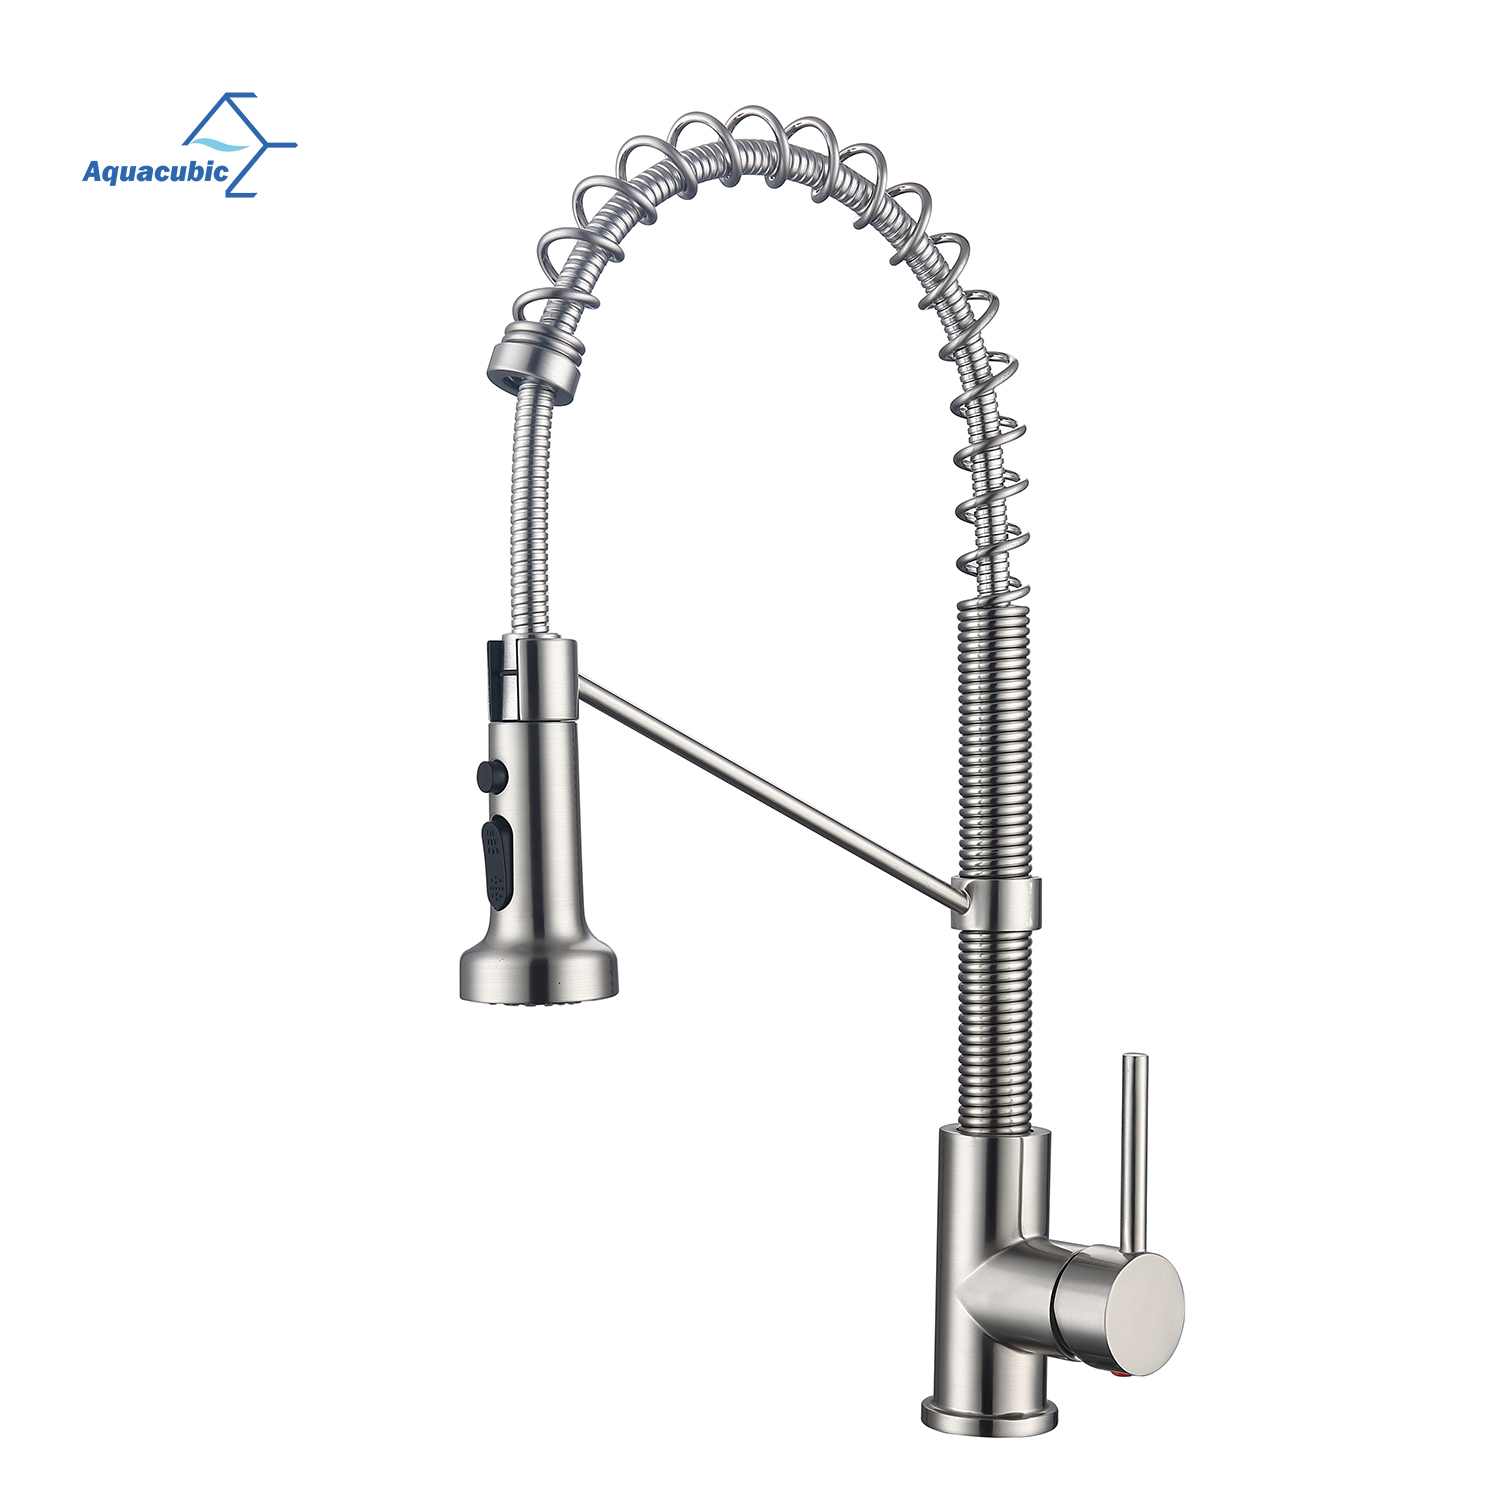 Aquacubic cUPC NSF Modern Low Lead Certified Design Stylish Spring Neck Pull Down Water Kitchen Faucet AF3044-5